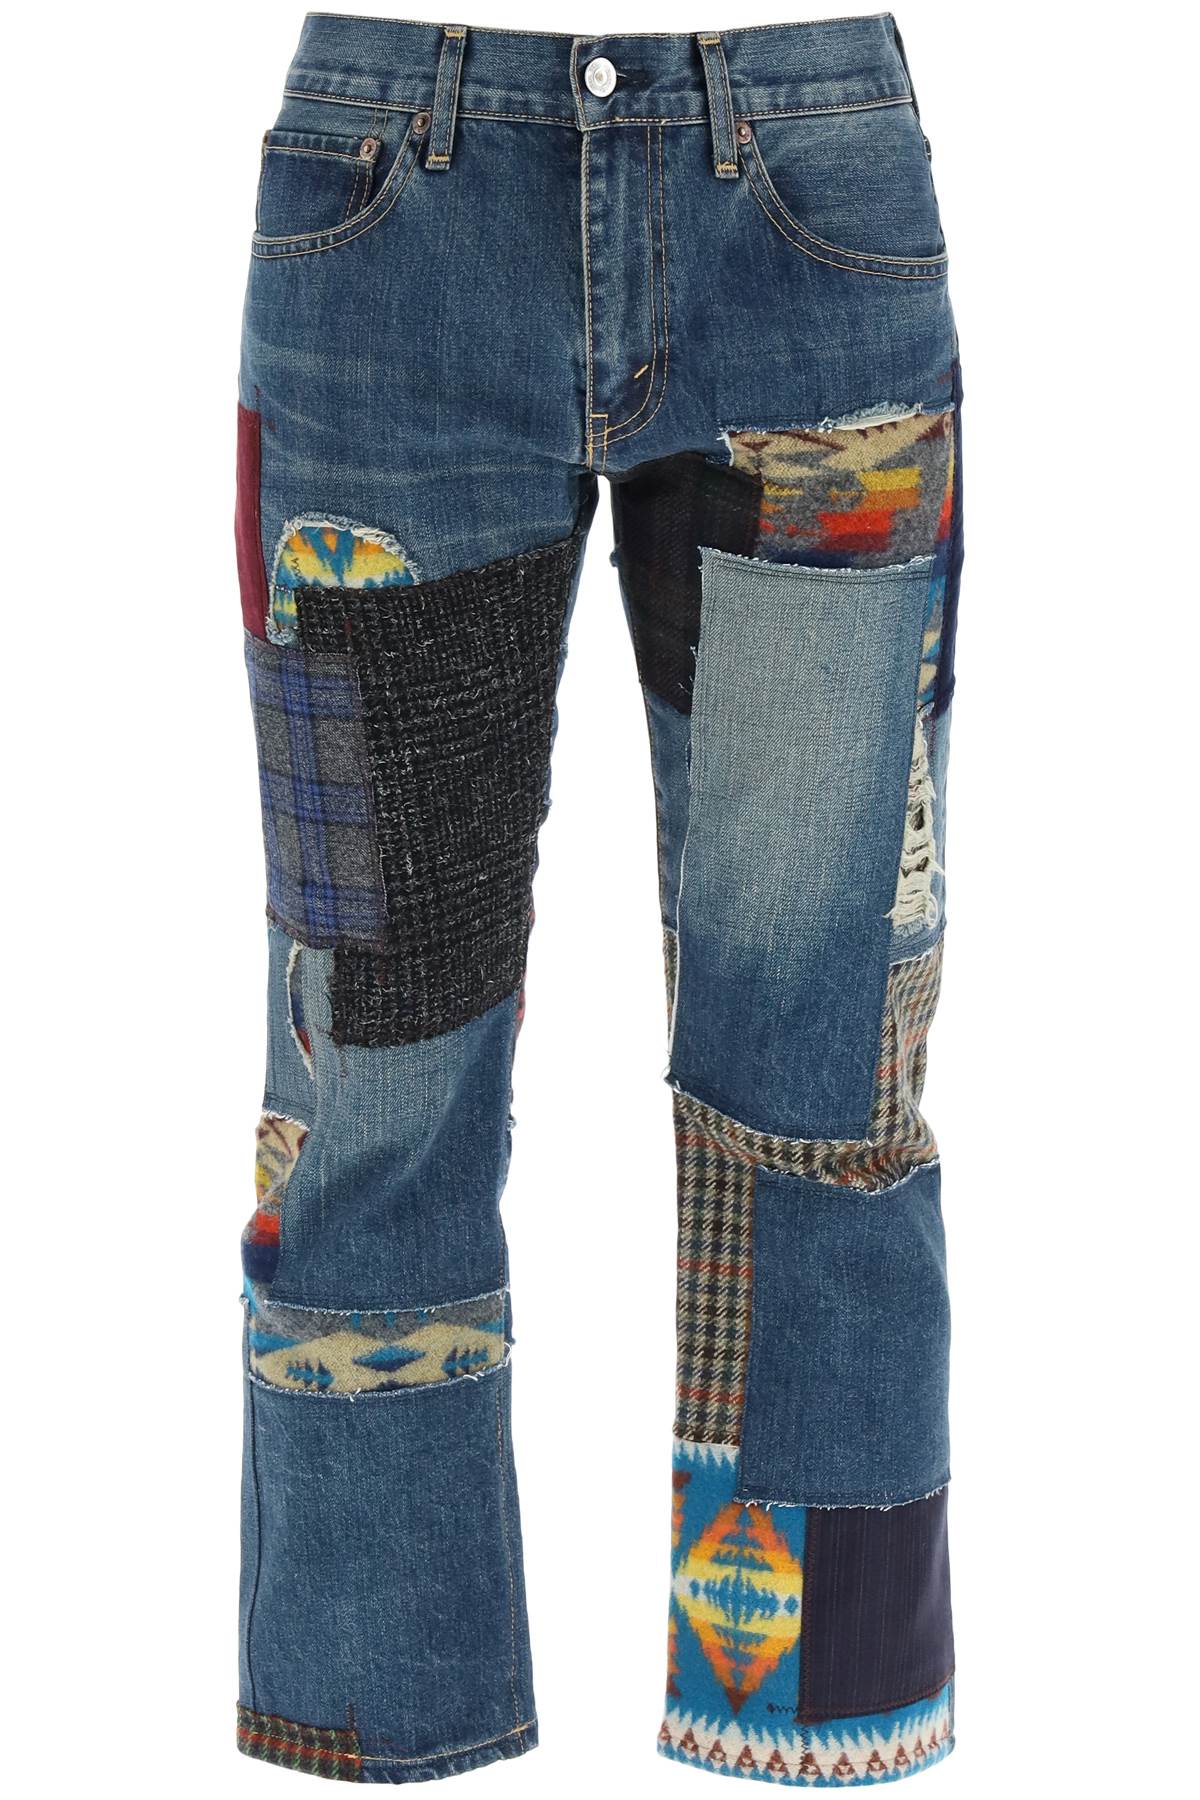 JUNYA WATANABE LEVIS CROPPED PATCHWORK JEANS